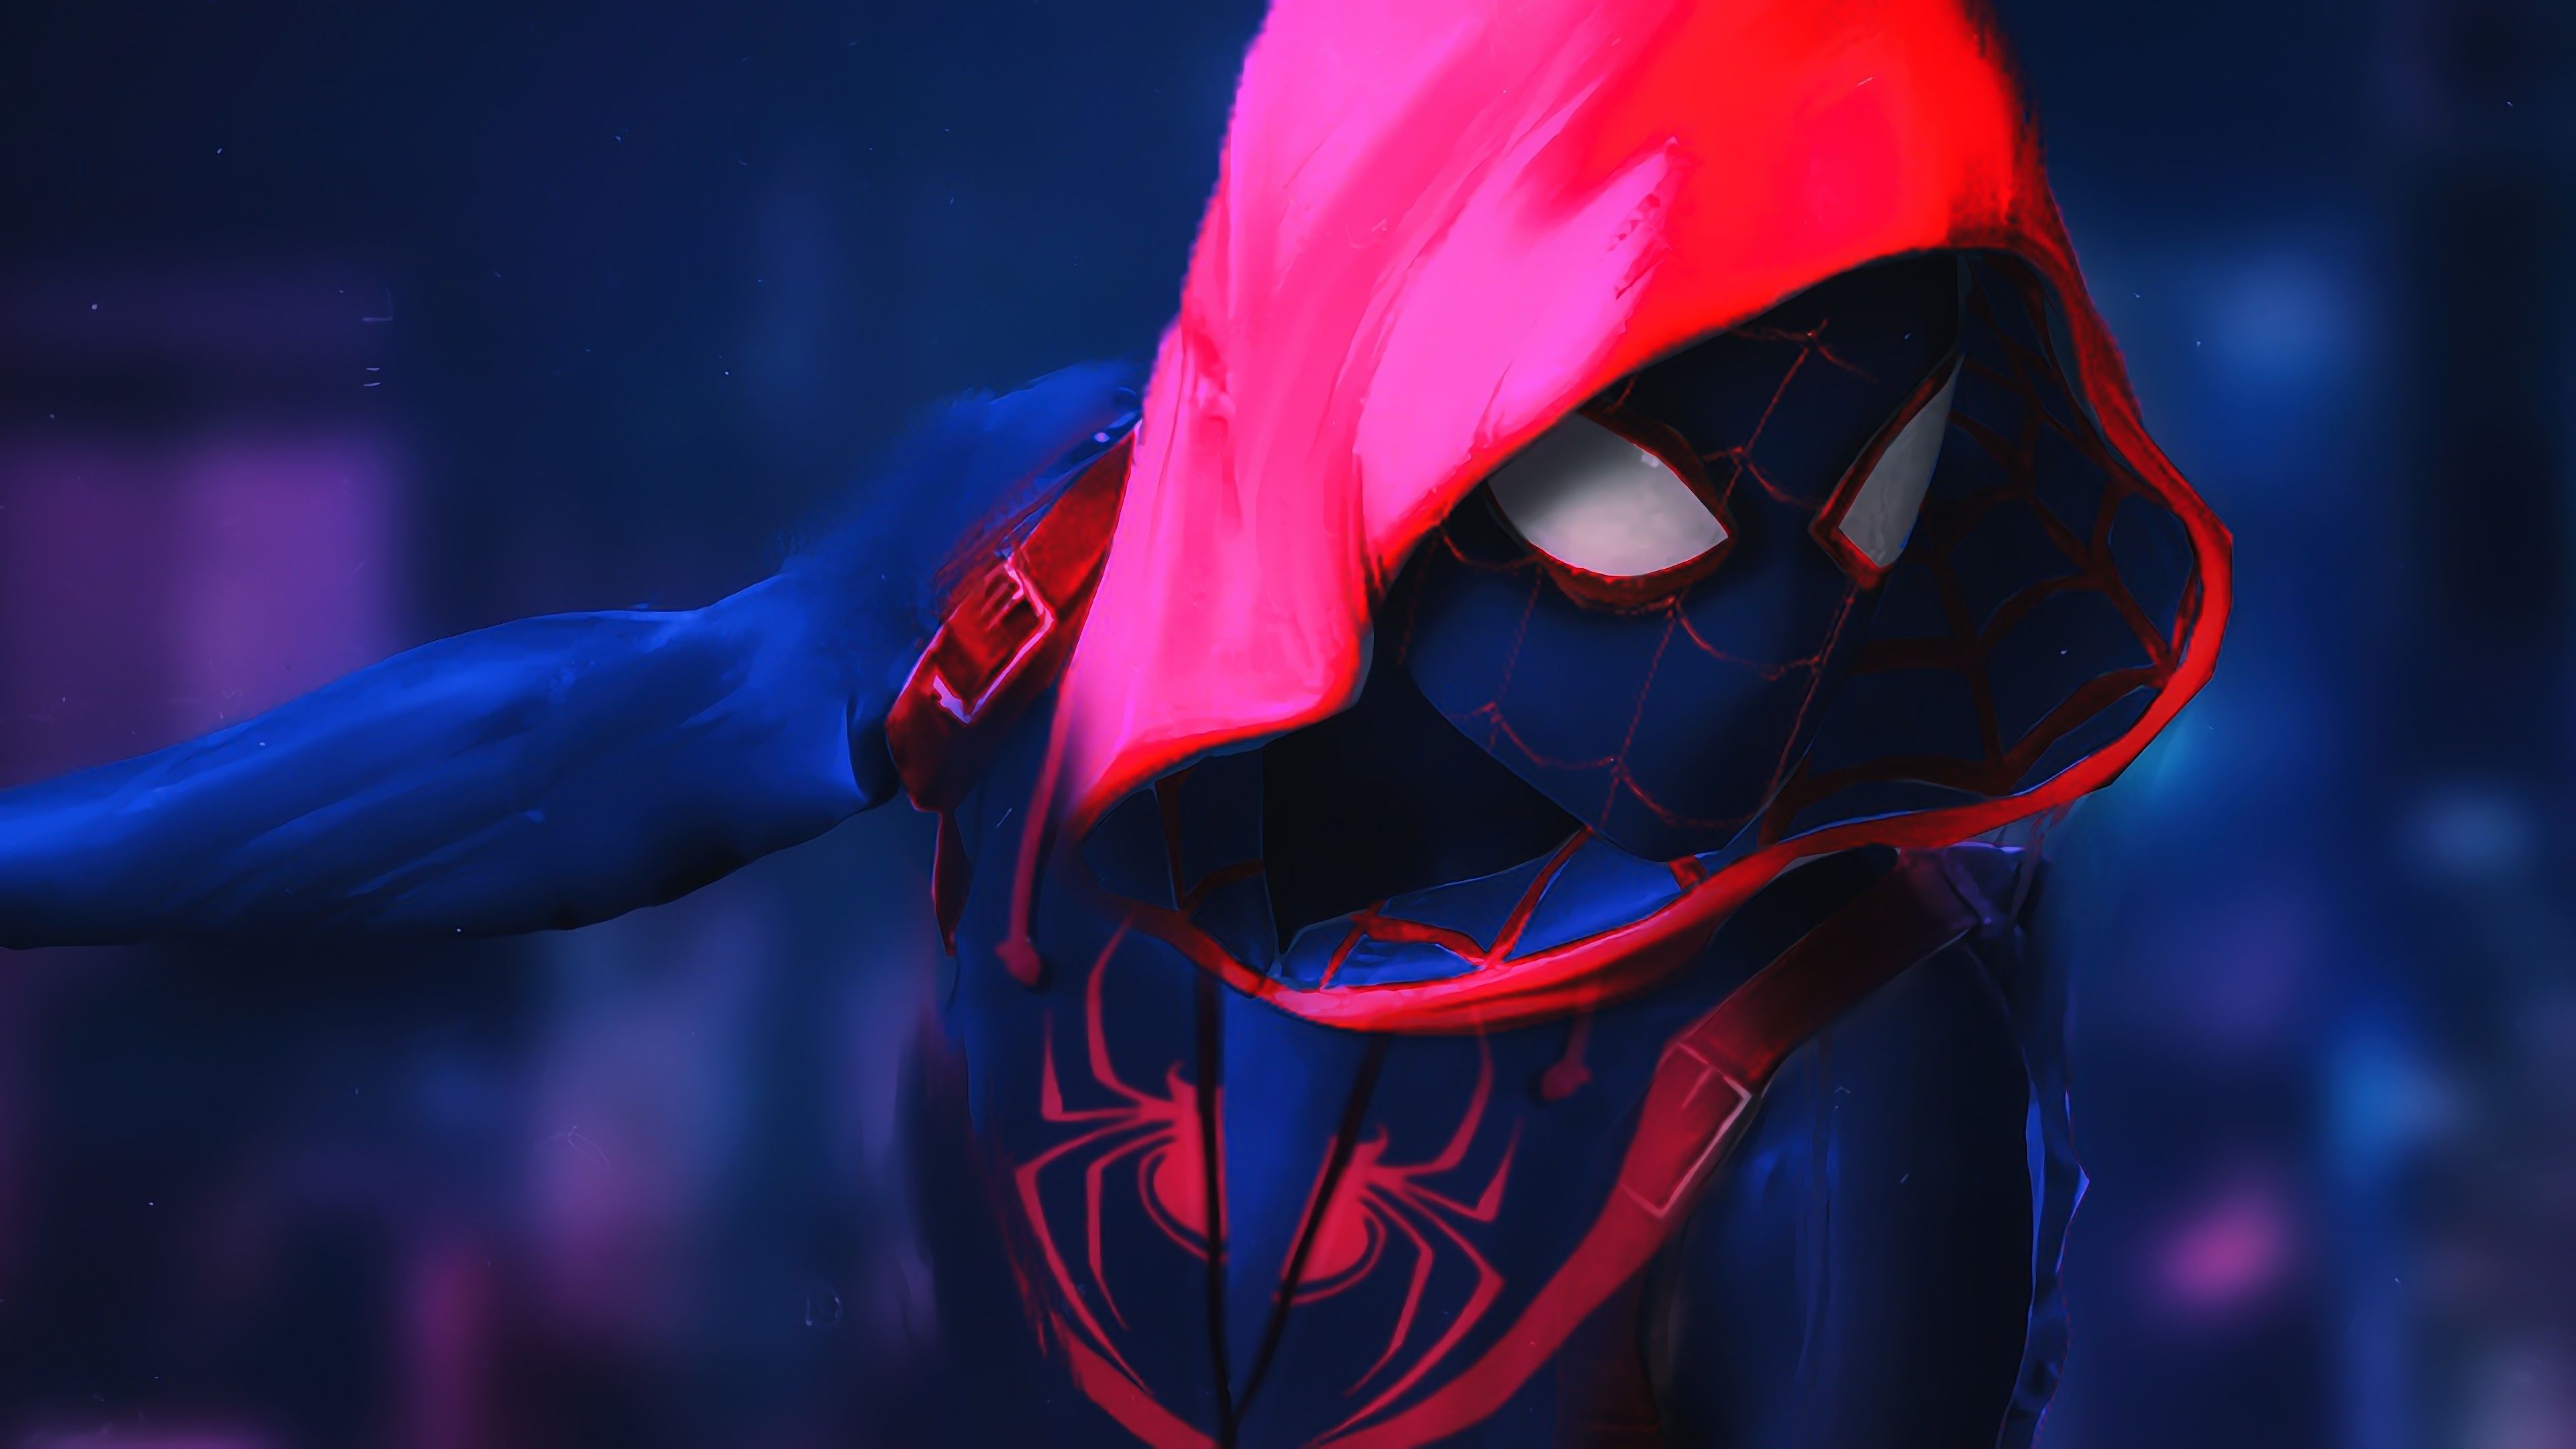 Download 3840x2160 Spider Man: Into The Spider Verse, Hoodie, Animation Wallpaper For UHD TV